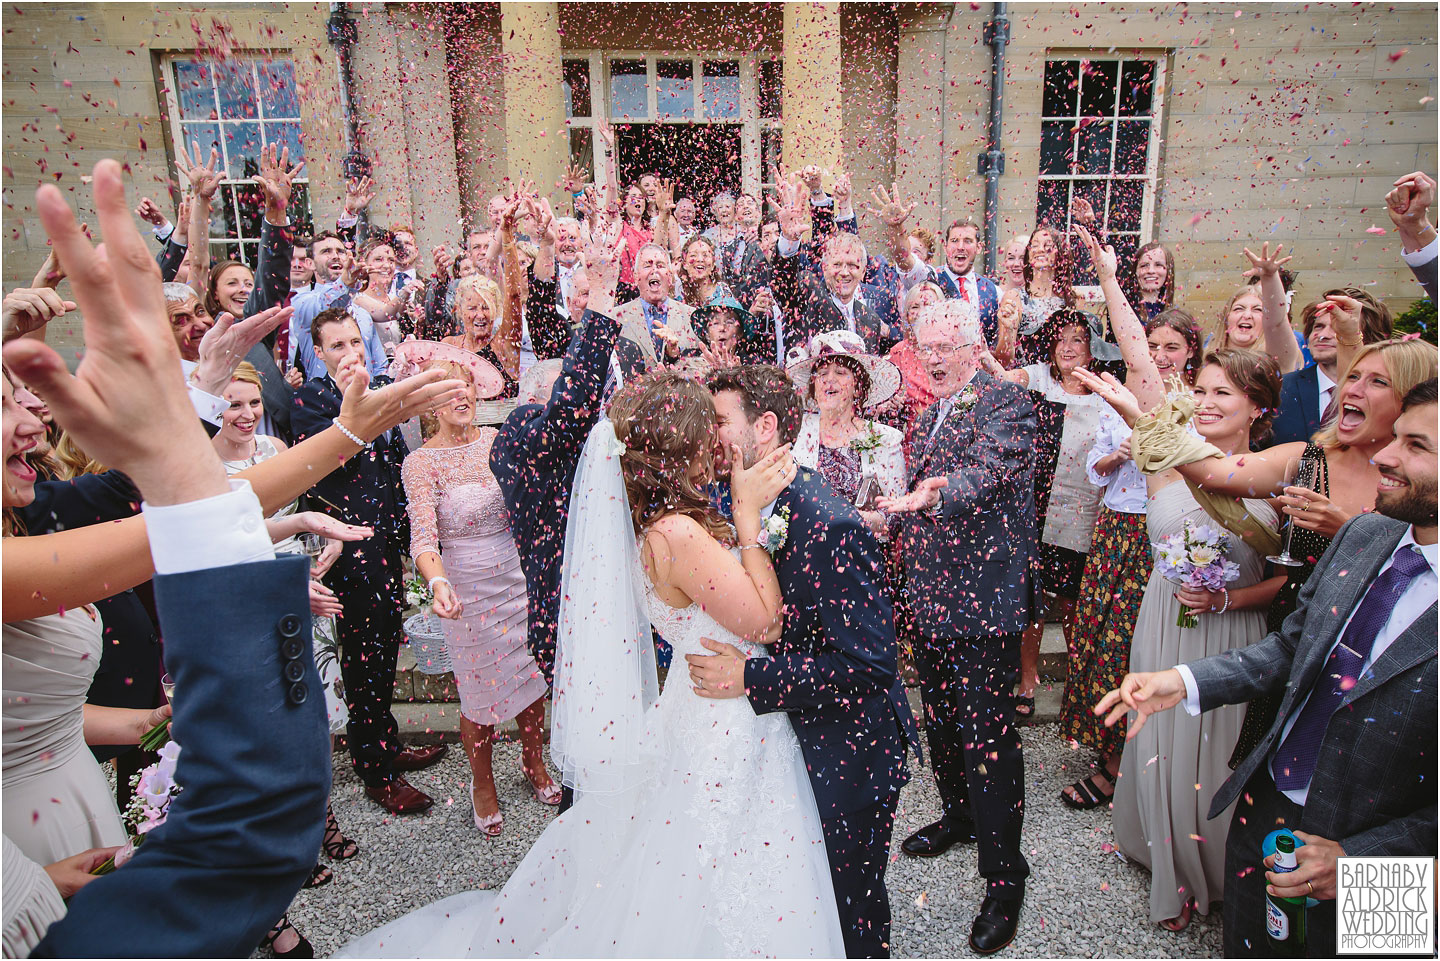 A bride and groom kiss as guests throw colourful confetti after their civil ceremony at Saltmarshe Hall stately home wedding venue in east Yorkshire